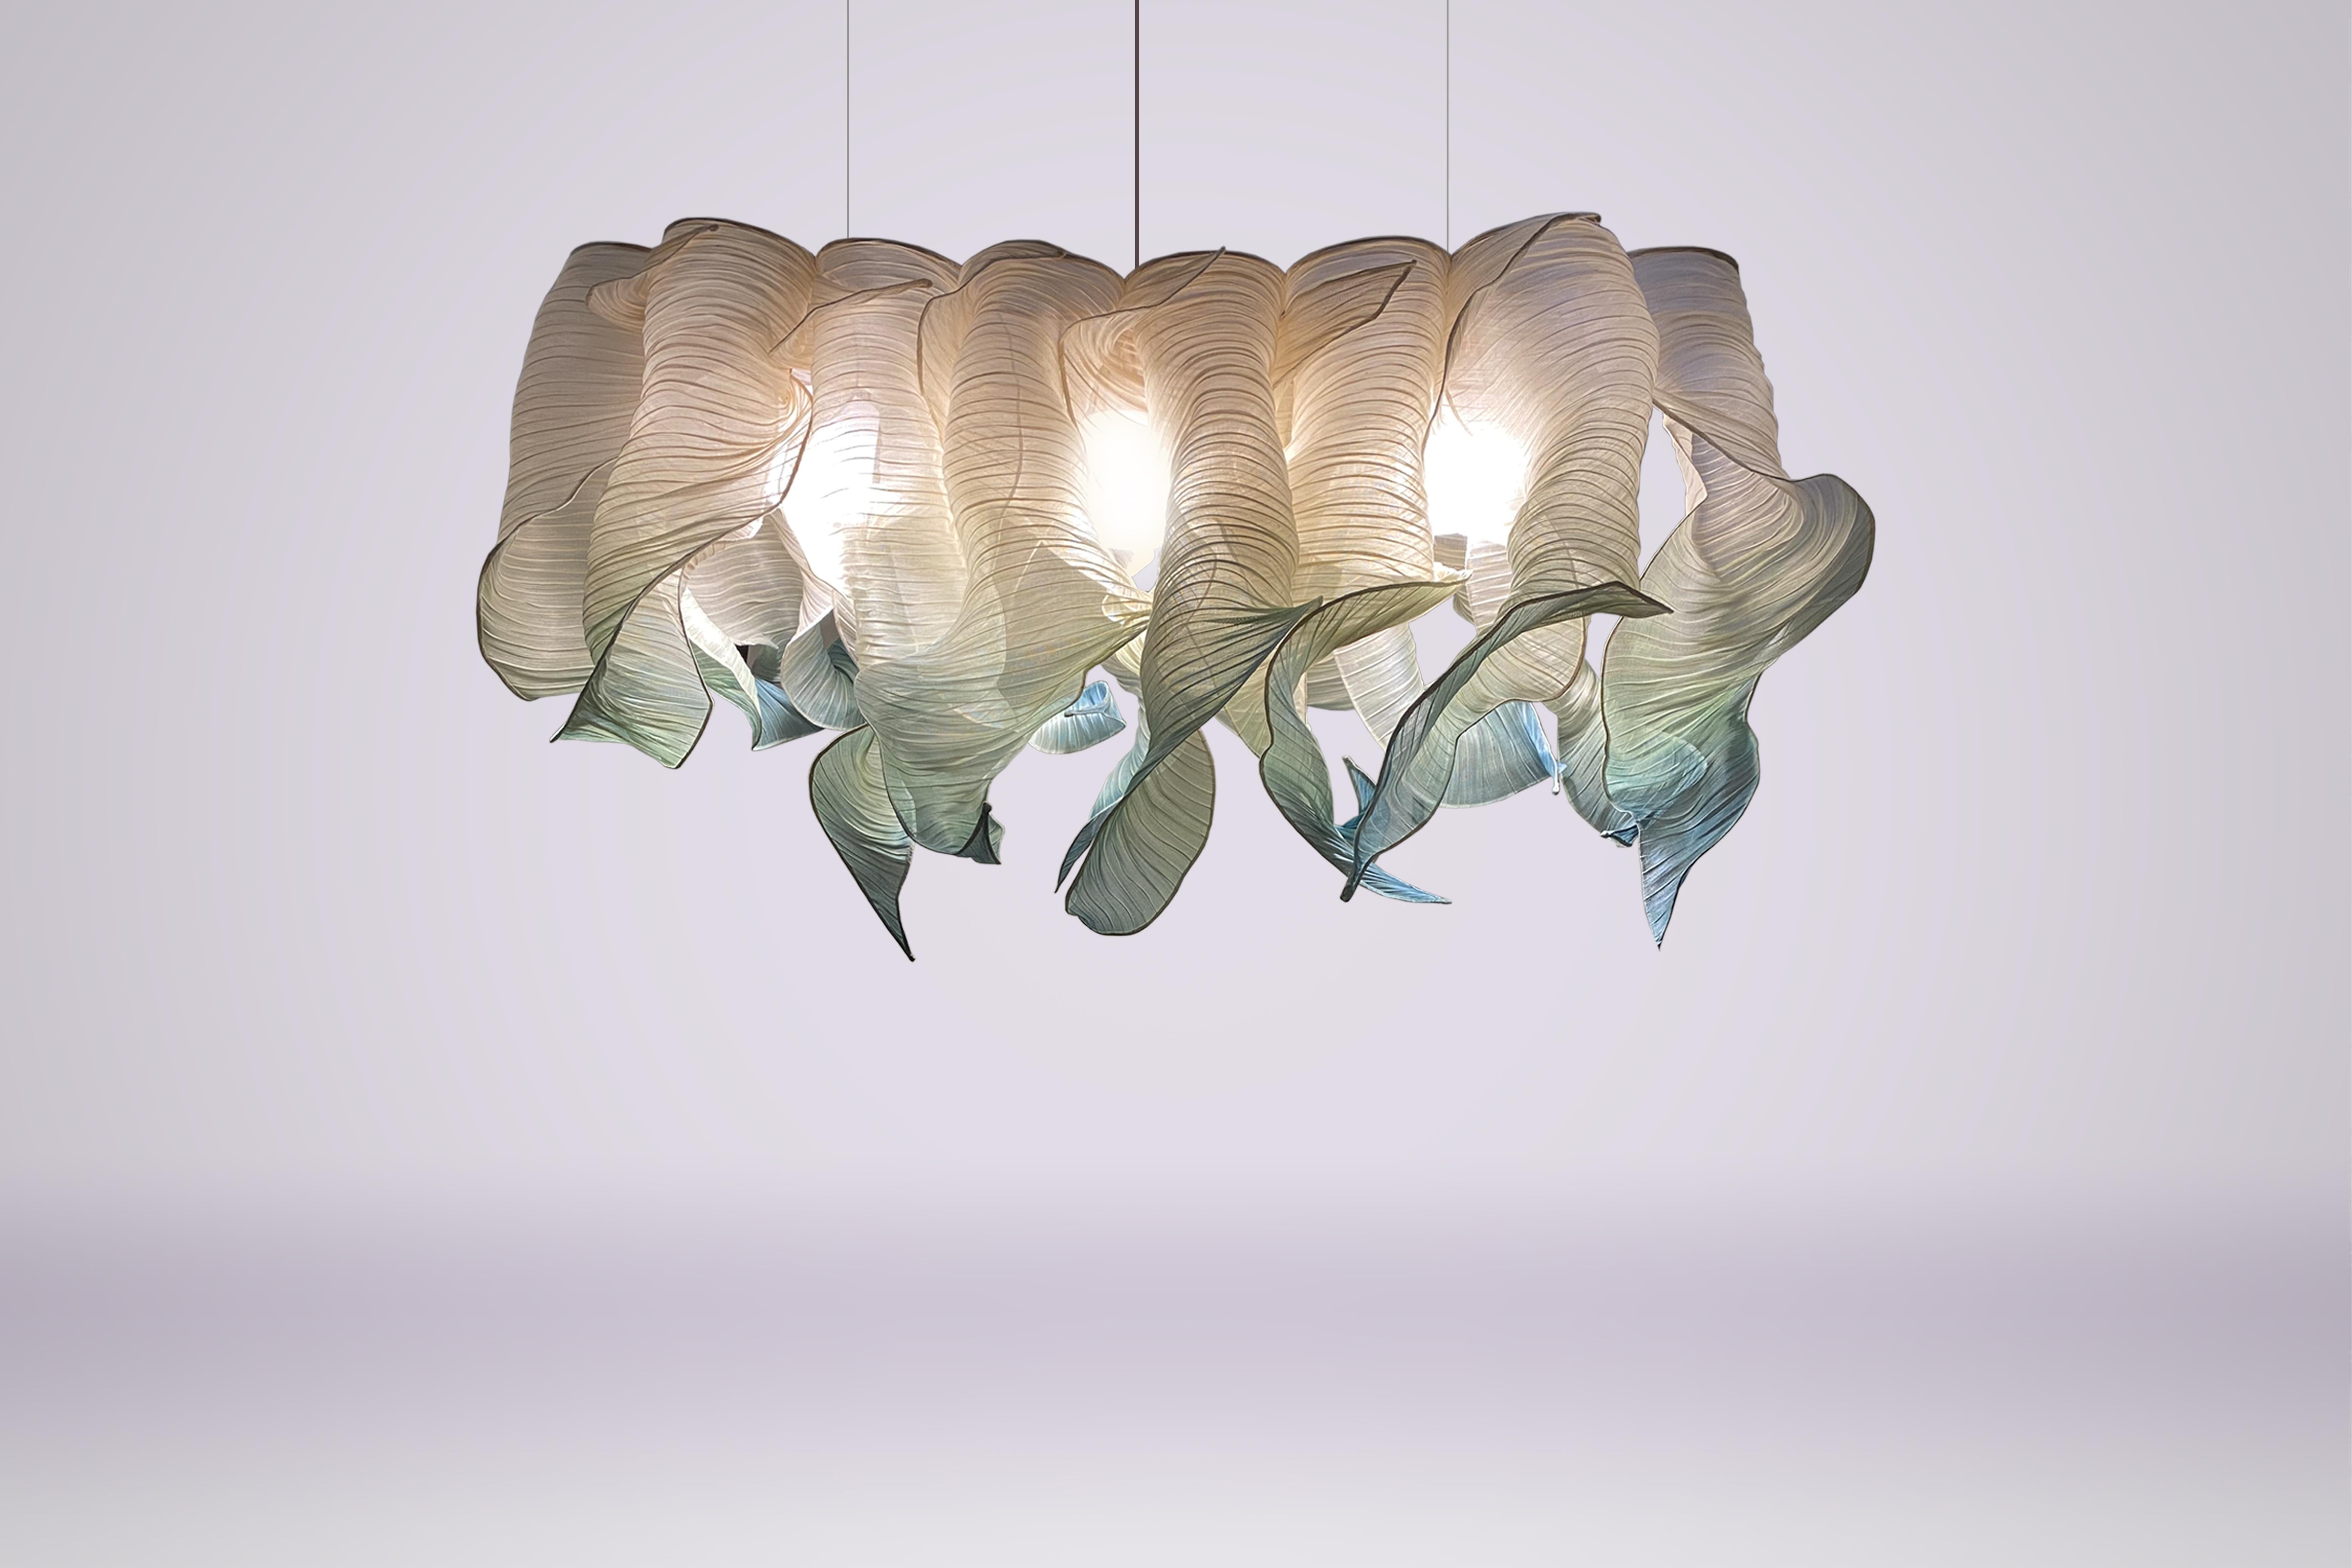 Seafoam Nebula Grande hand-painted pendant lamp by Mirei Monticelli
Dimensions: D 150 x W 50 x H 60 cm
Materials: Banaca fabric
Available in other colors.

Spiral clouds of Nebula are individually hand-painted in seafoam green to evoke memories